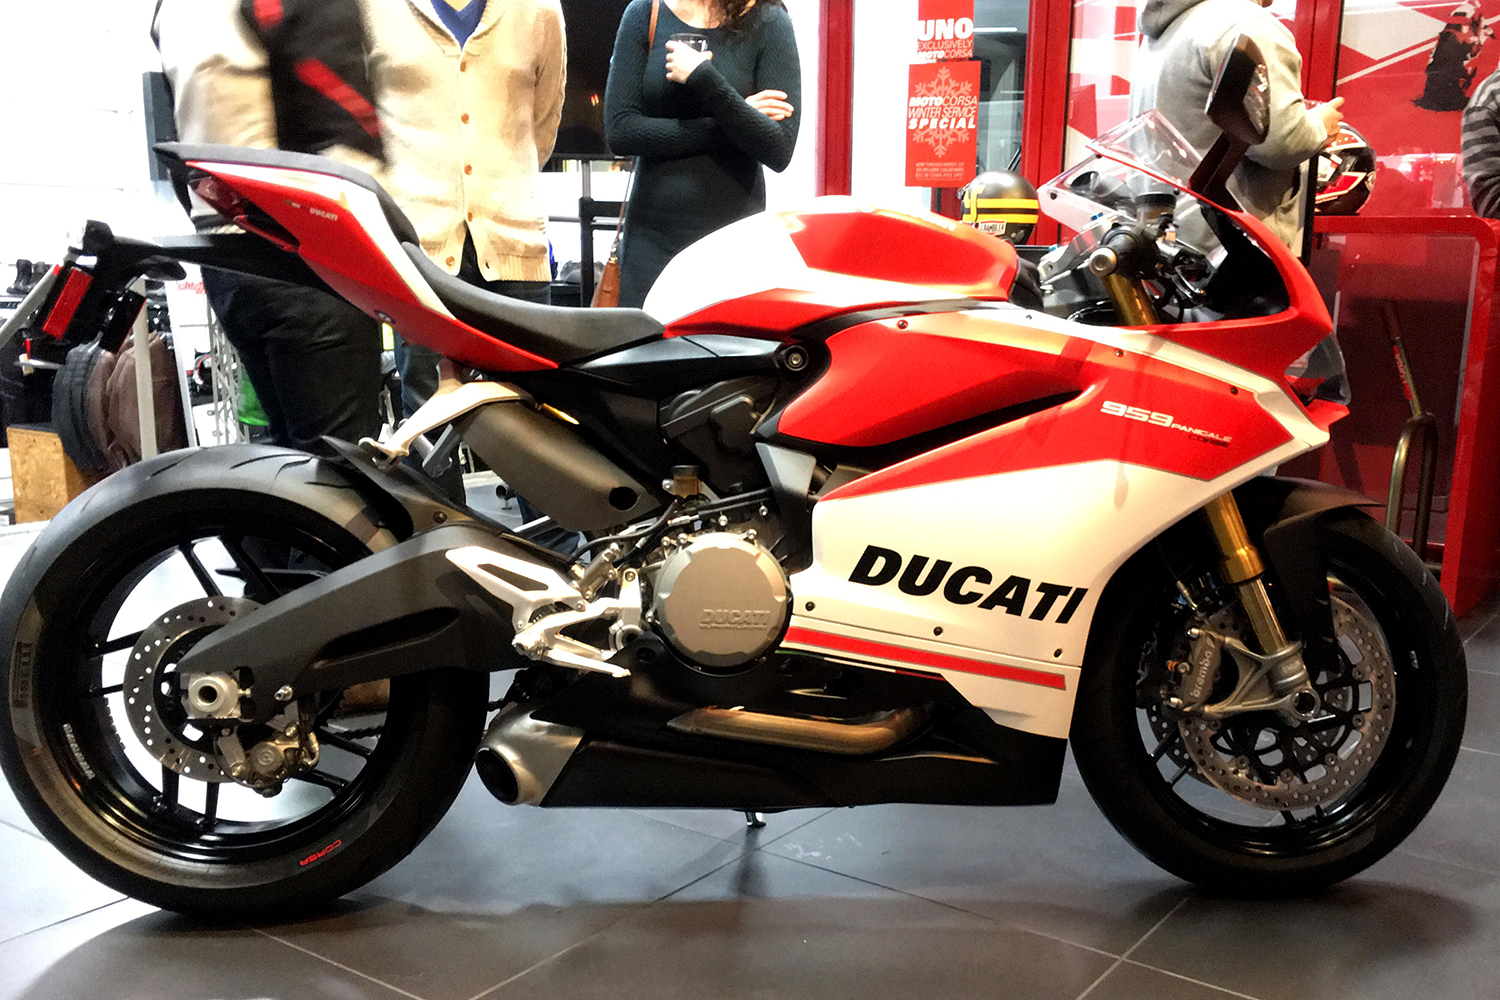 ducati 2018 motorcycle preview panigale 959 corse full2